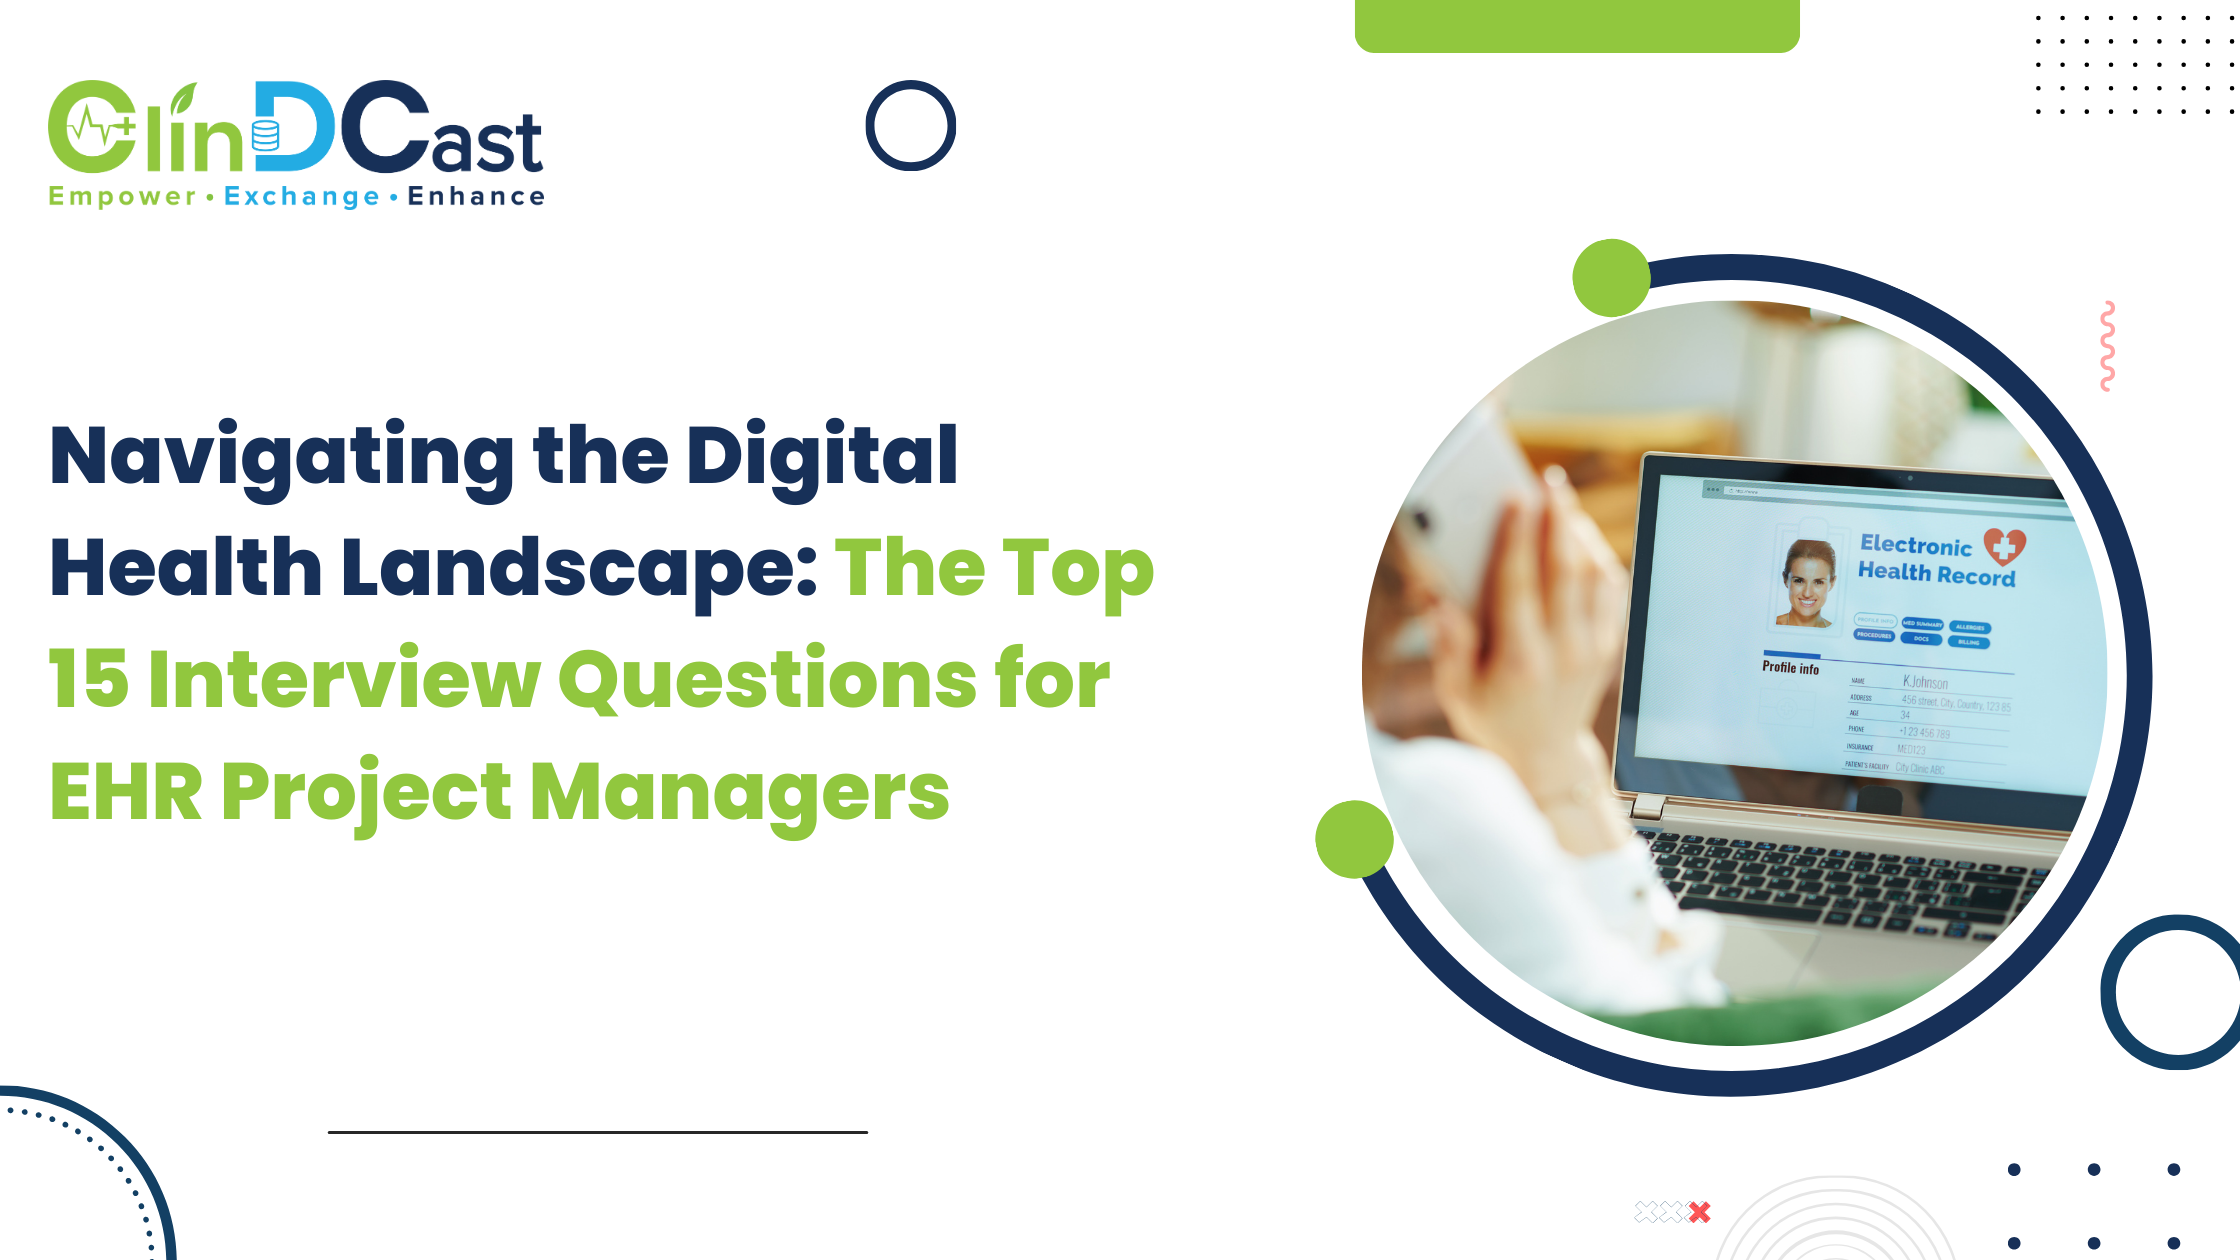 Navigating the Digital Health Landscape: The Top 15 Interview Questions for EHR Project Managers